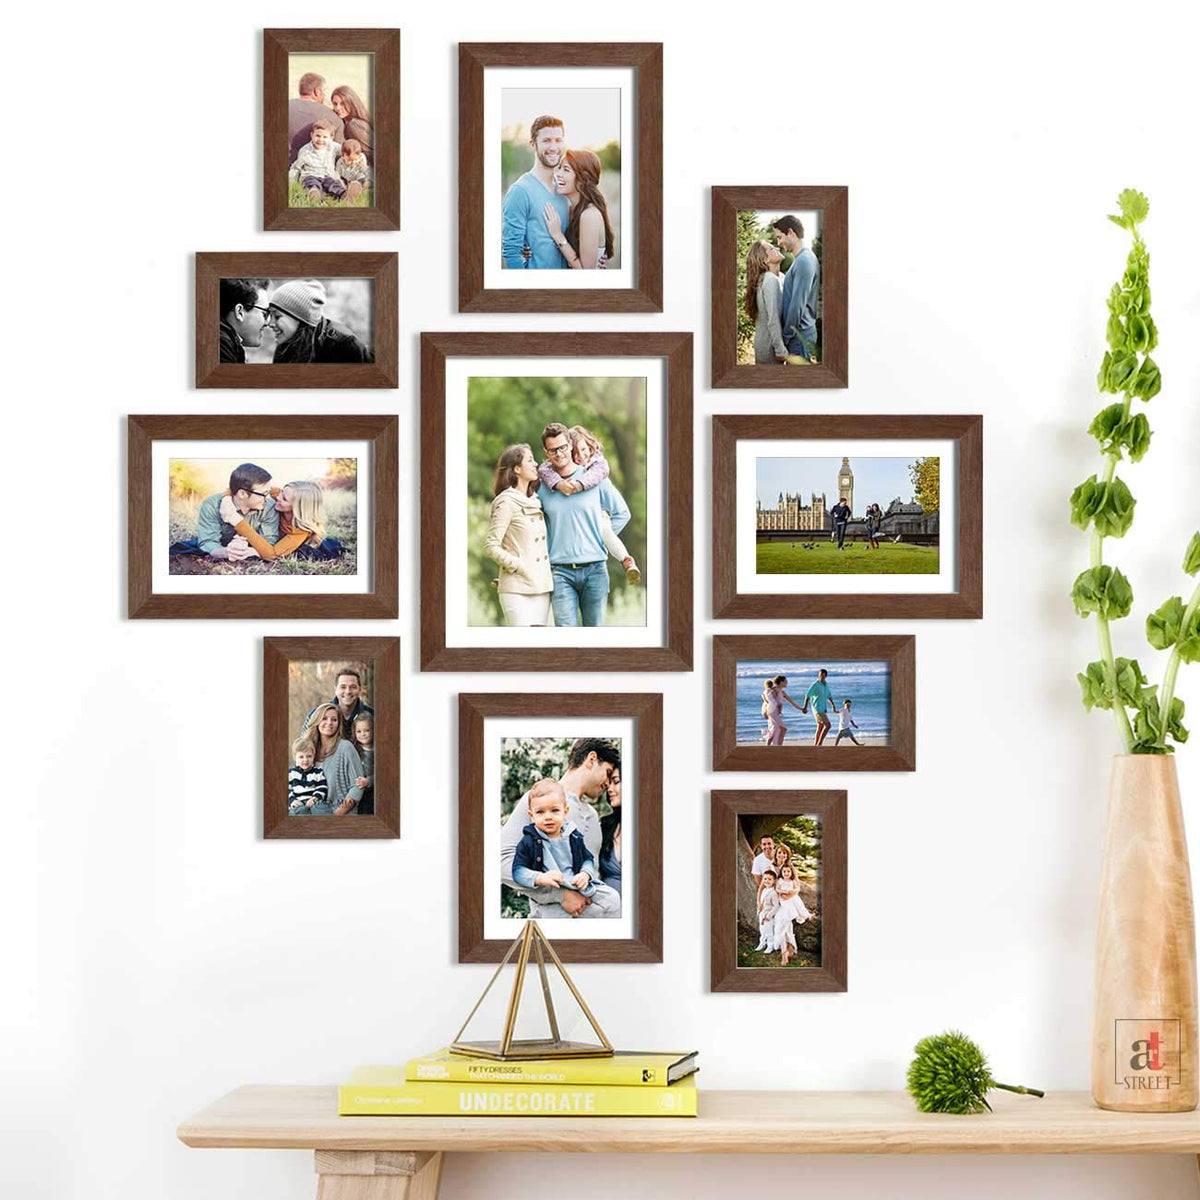 Gallery 24x36 Picture Frame With Mat 20x30 Poster 24x36, 49% OFF